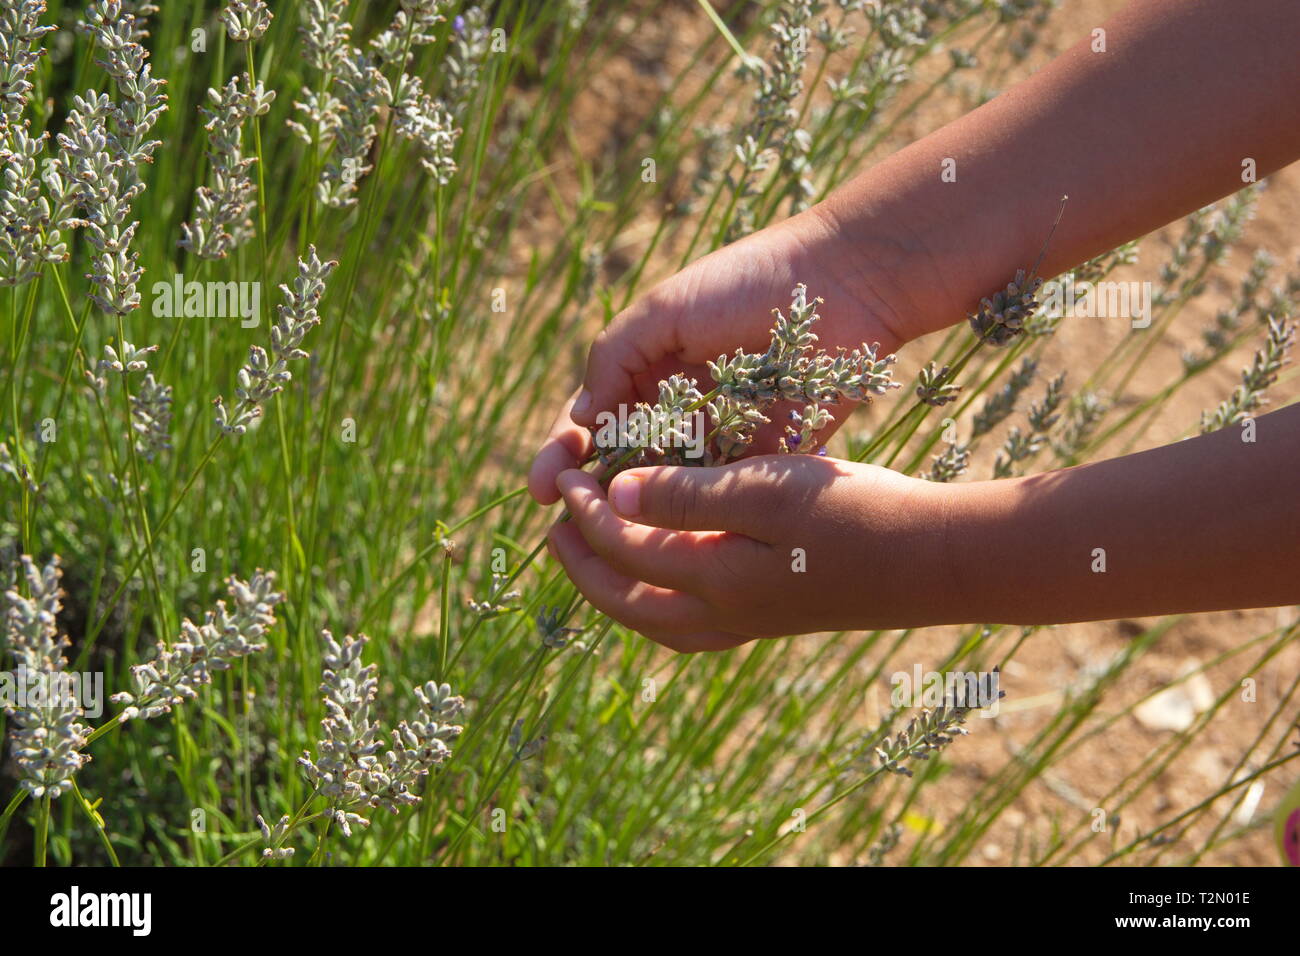 Hands collecting lavender flowers in the garden. Stock Photo